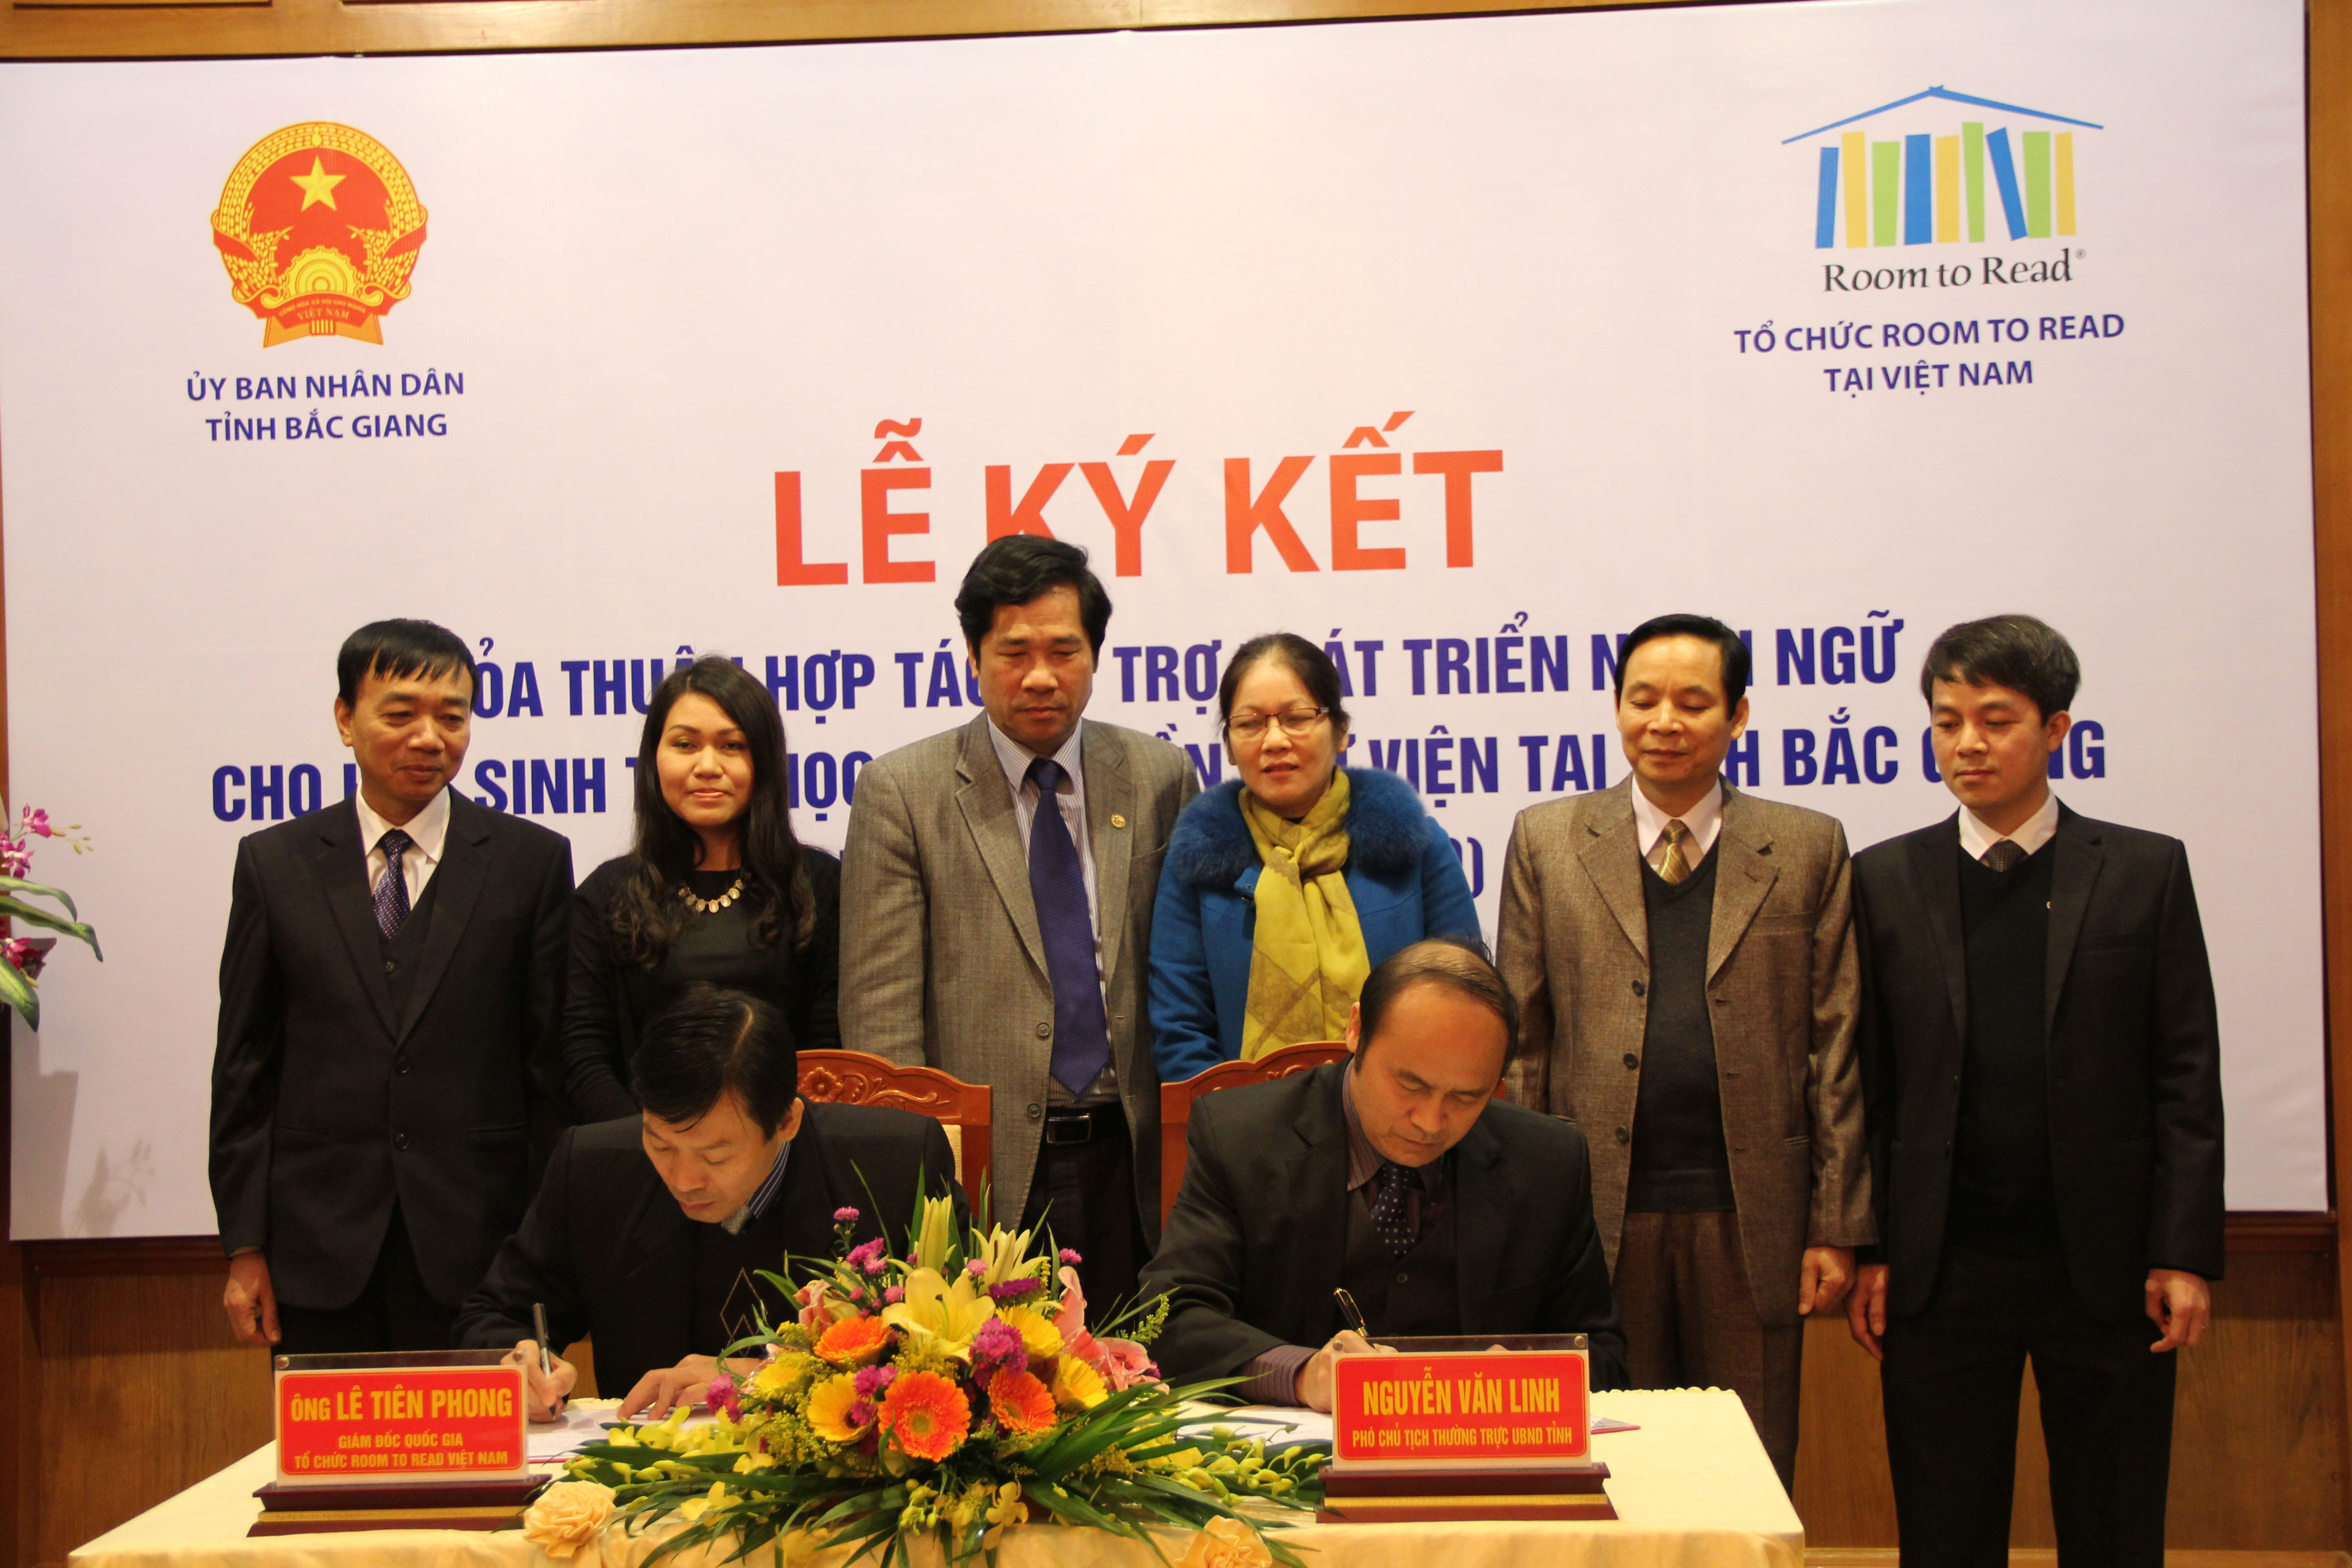 THE SINGNING OF COOPERATION AGREEMENT BETWEEN BAC GIANG PROVINCE AND THE ROOM TO READ 